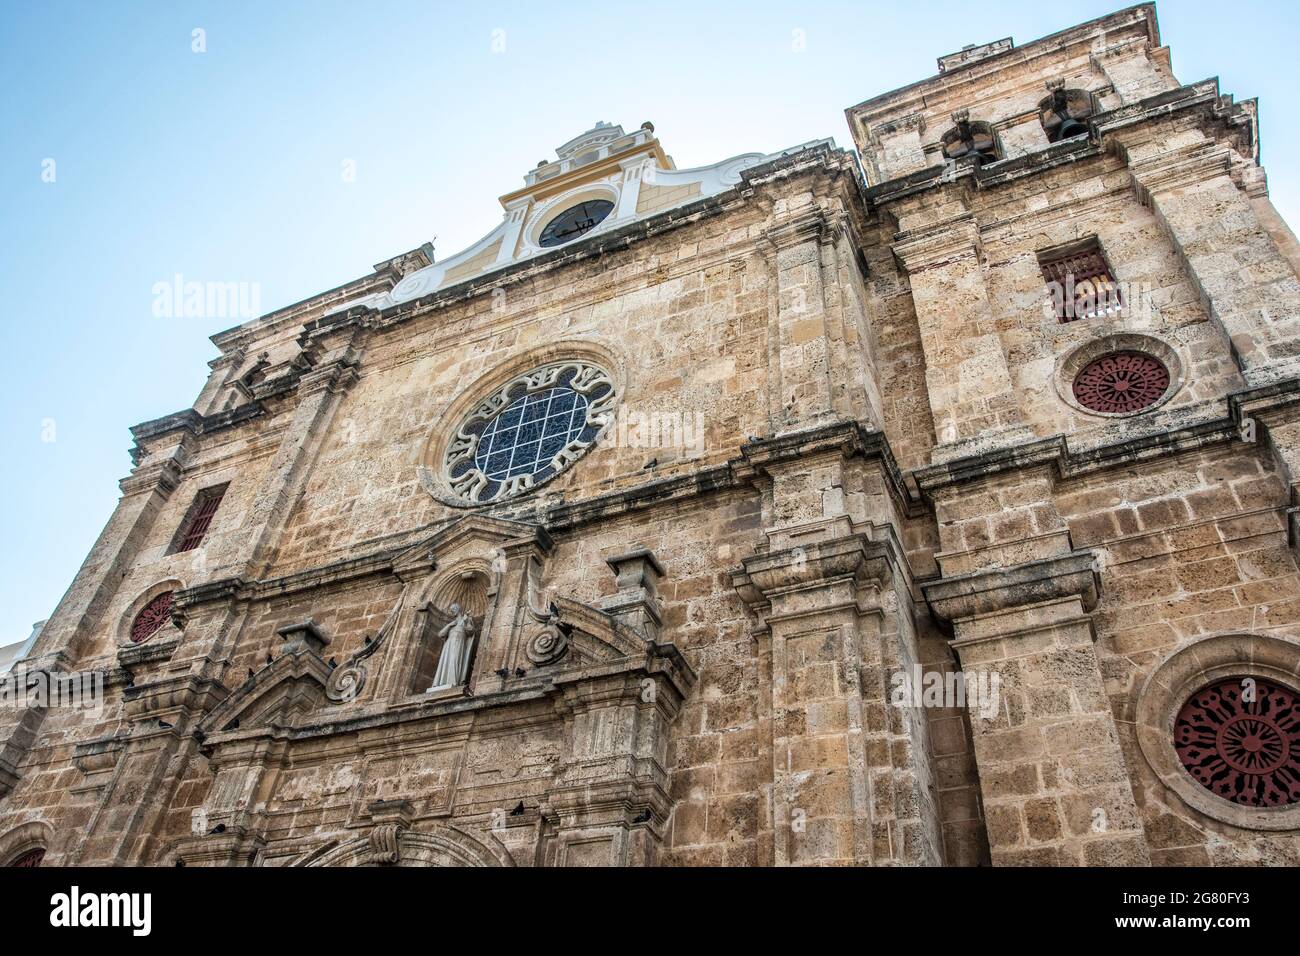 Church of San Pedro Claver, Church in old town Cartagena, Bolivar, Colombia - South America Stock Photo